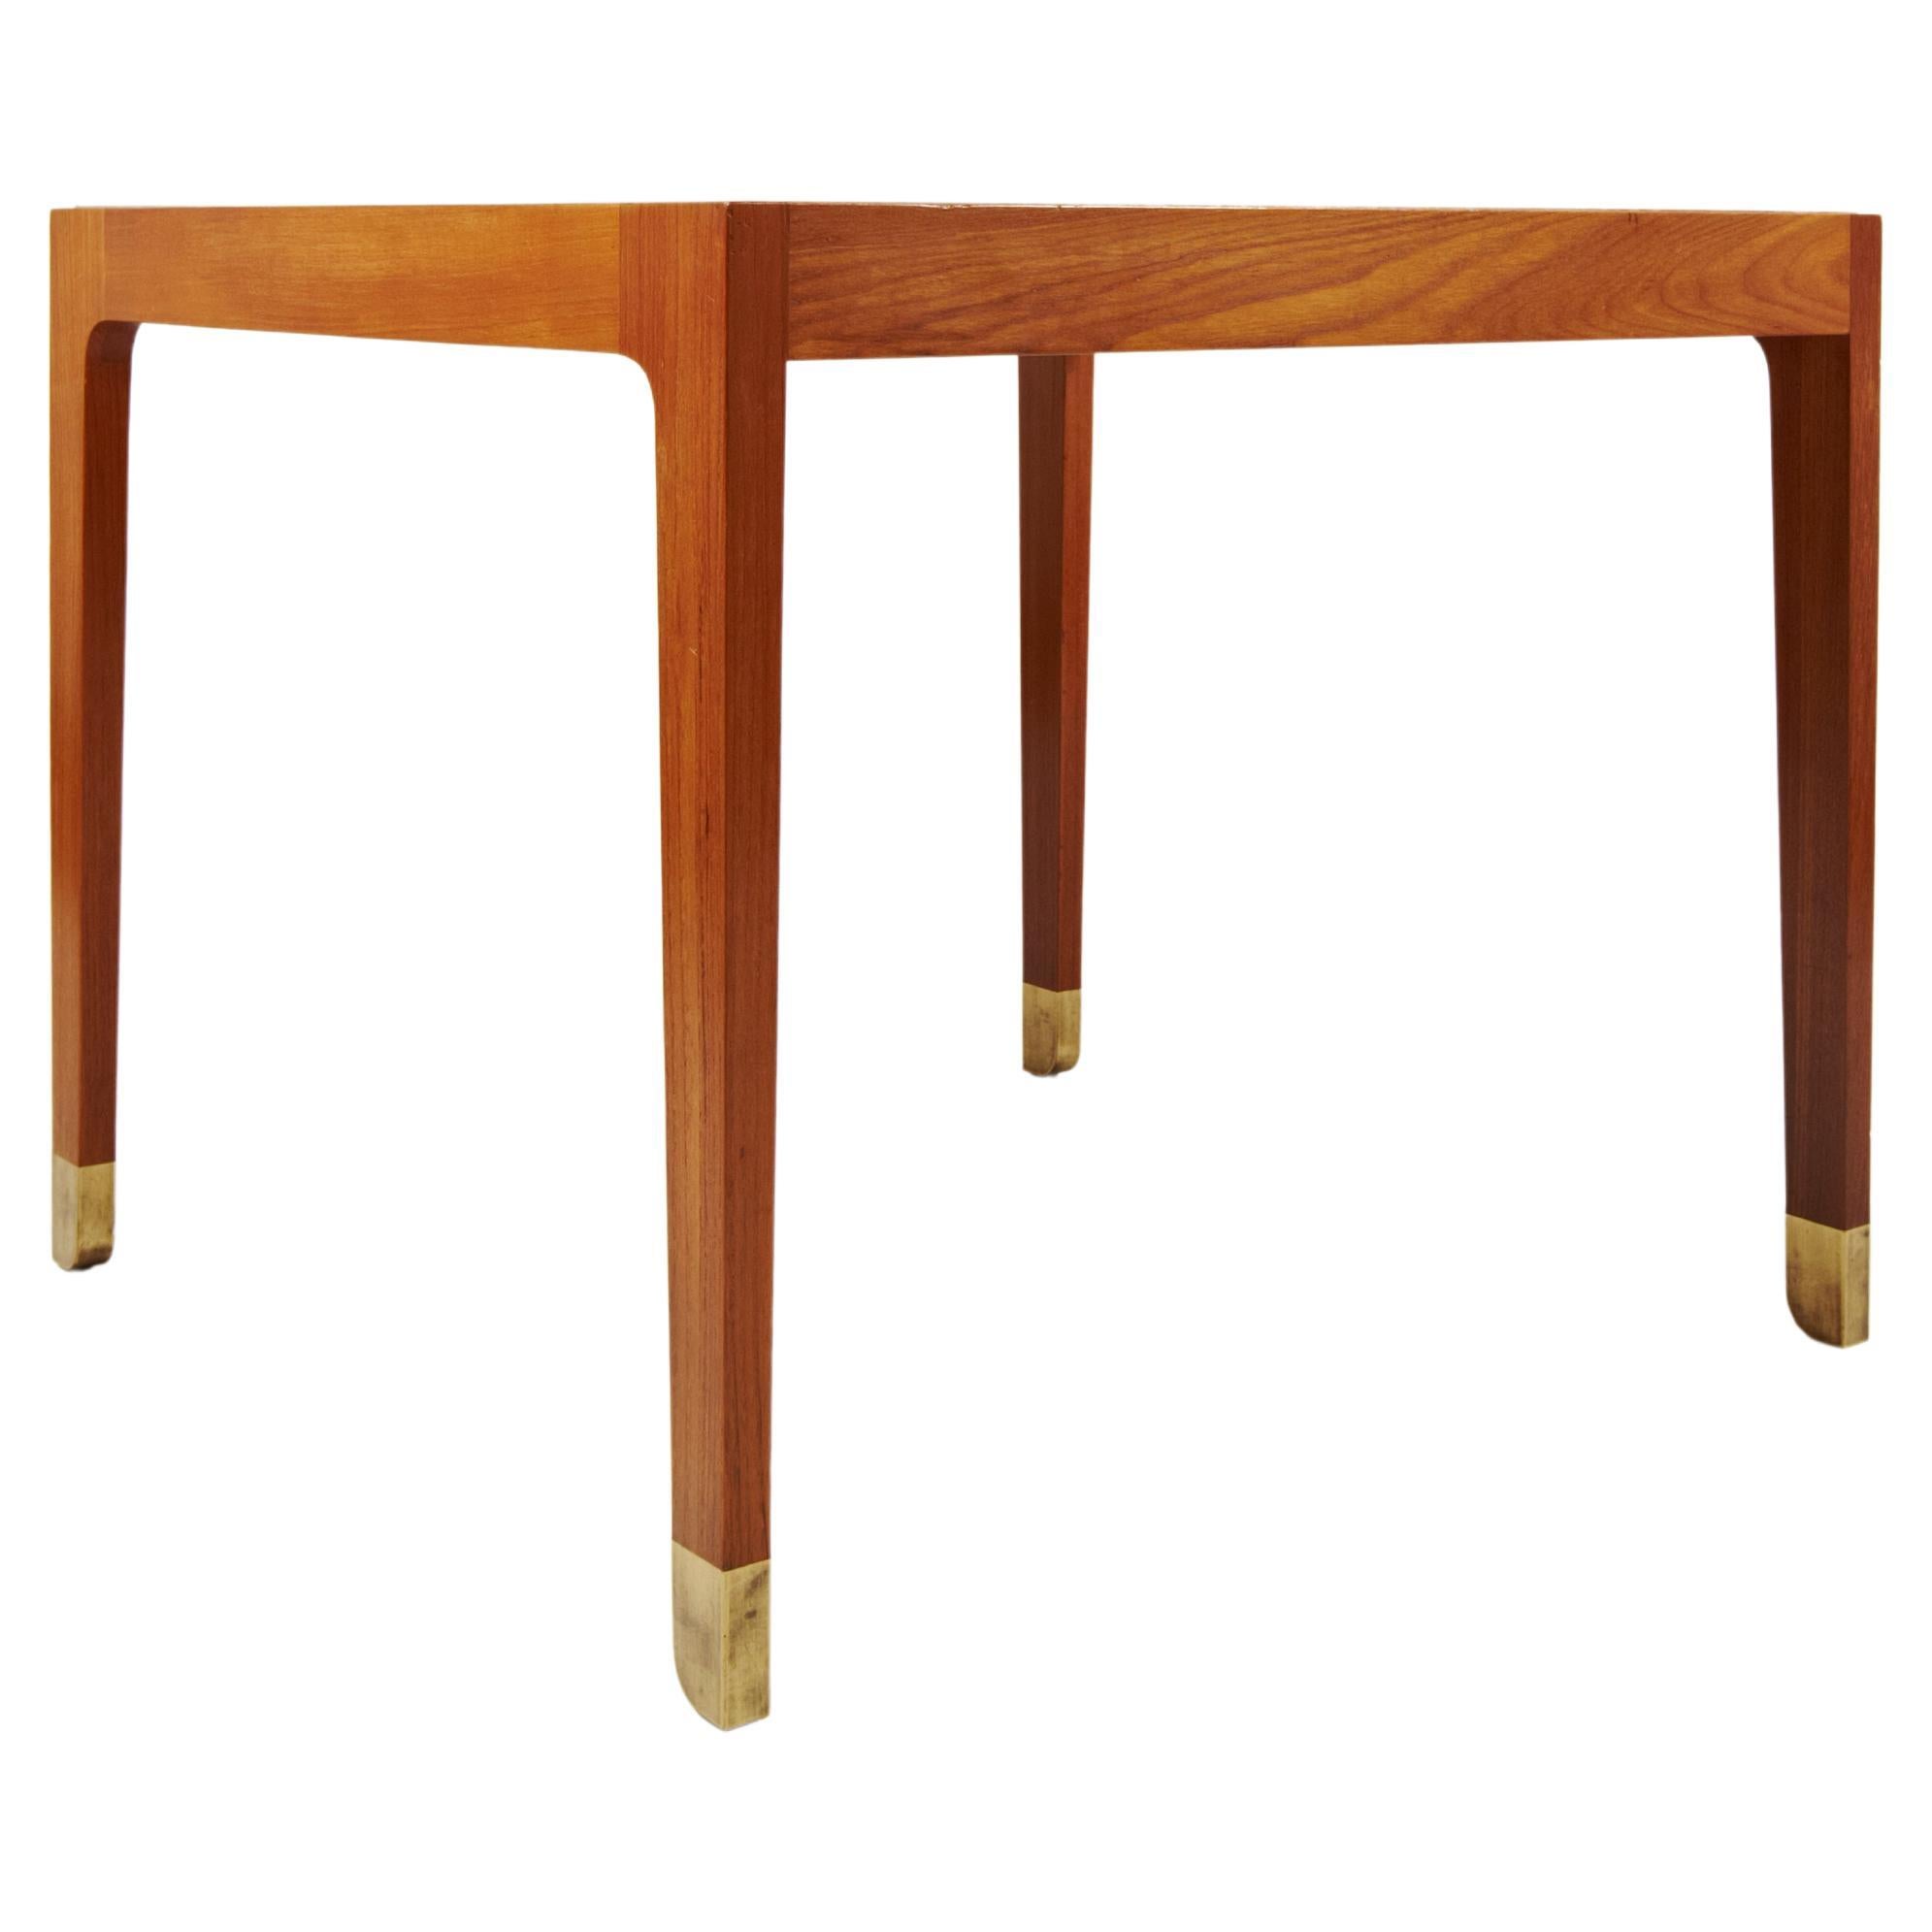 Finn Juhl:  Exhibition tables made 1947 - for dining or cards - single or pair For Sale